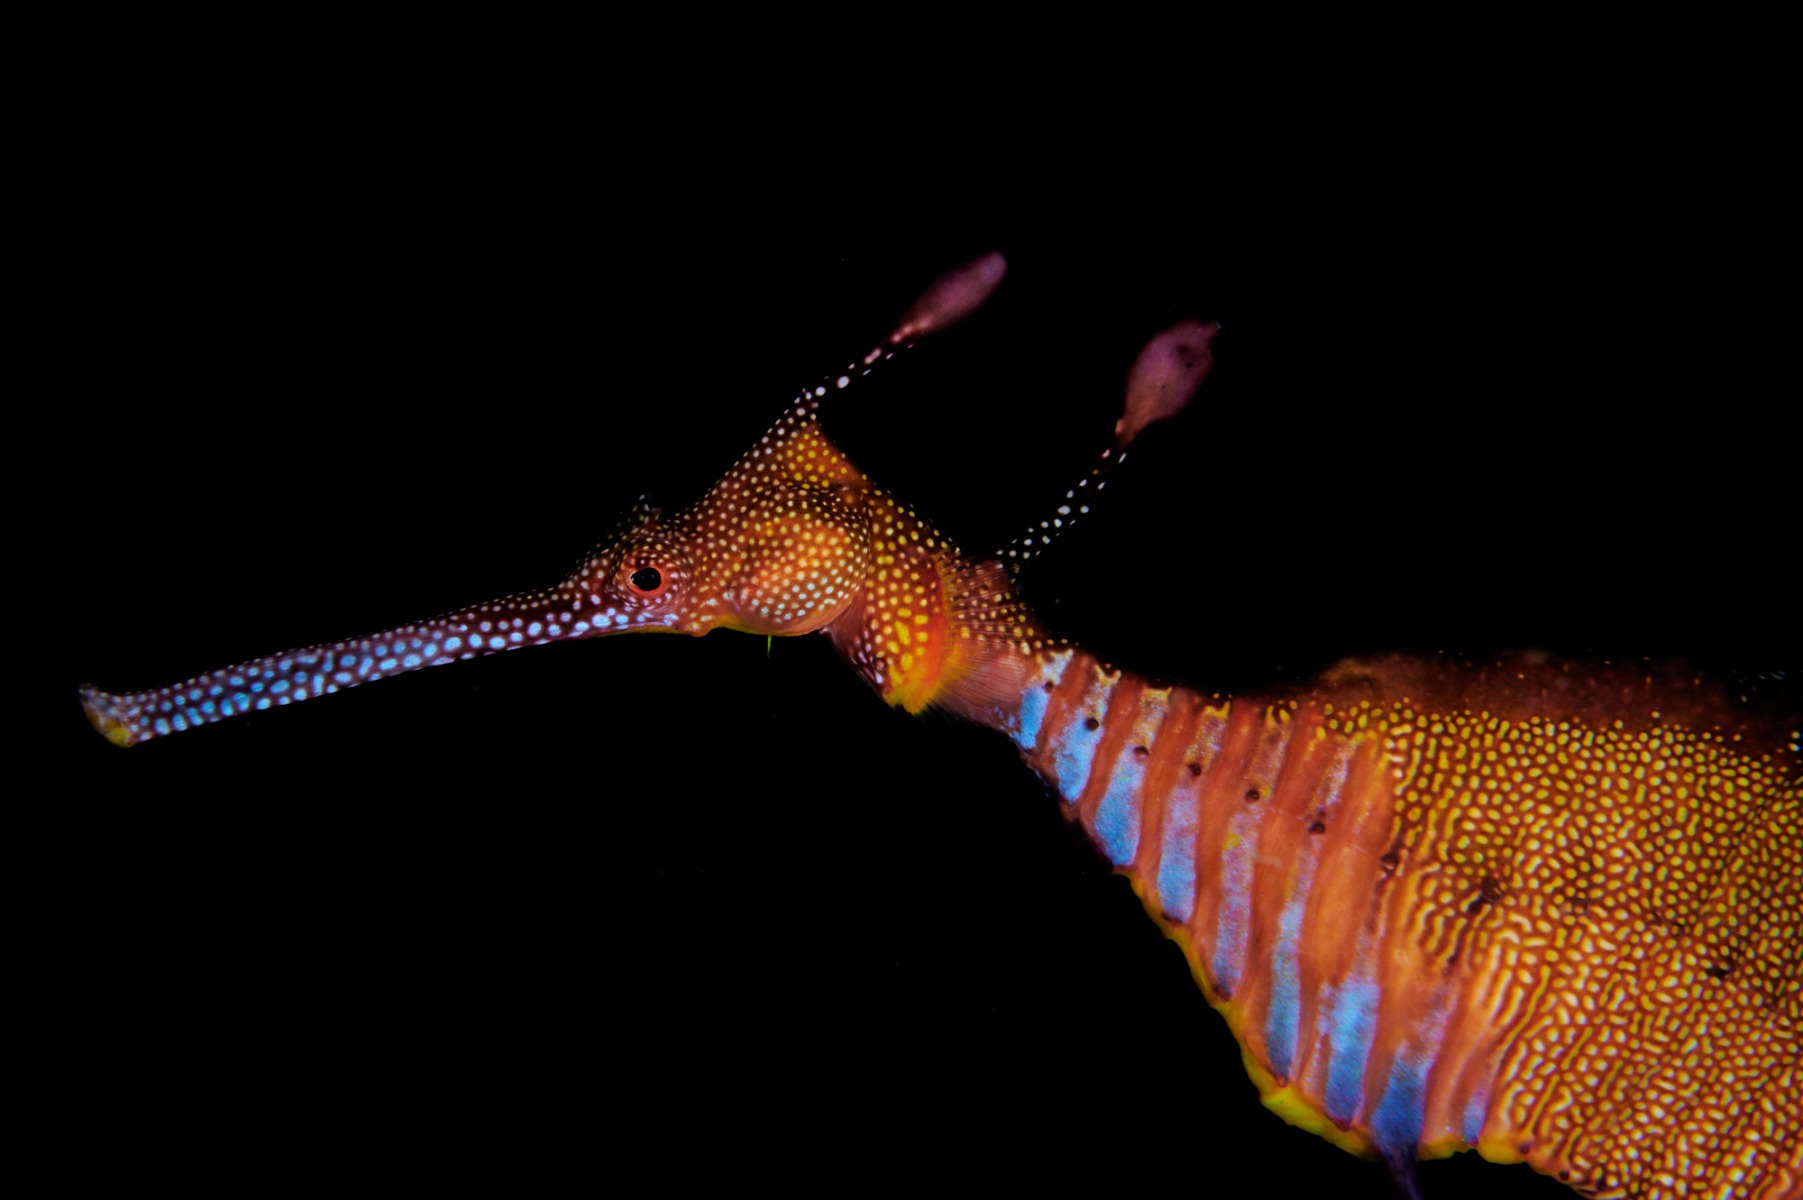 A close-up of a Weedy Seadragon  (Phyllopteryx taeniolatus) with a black background